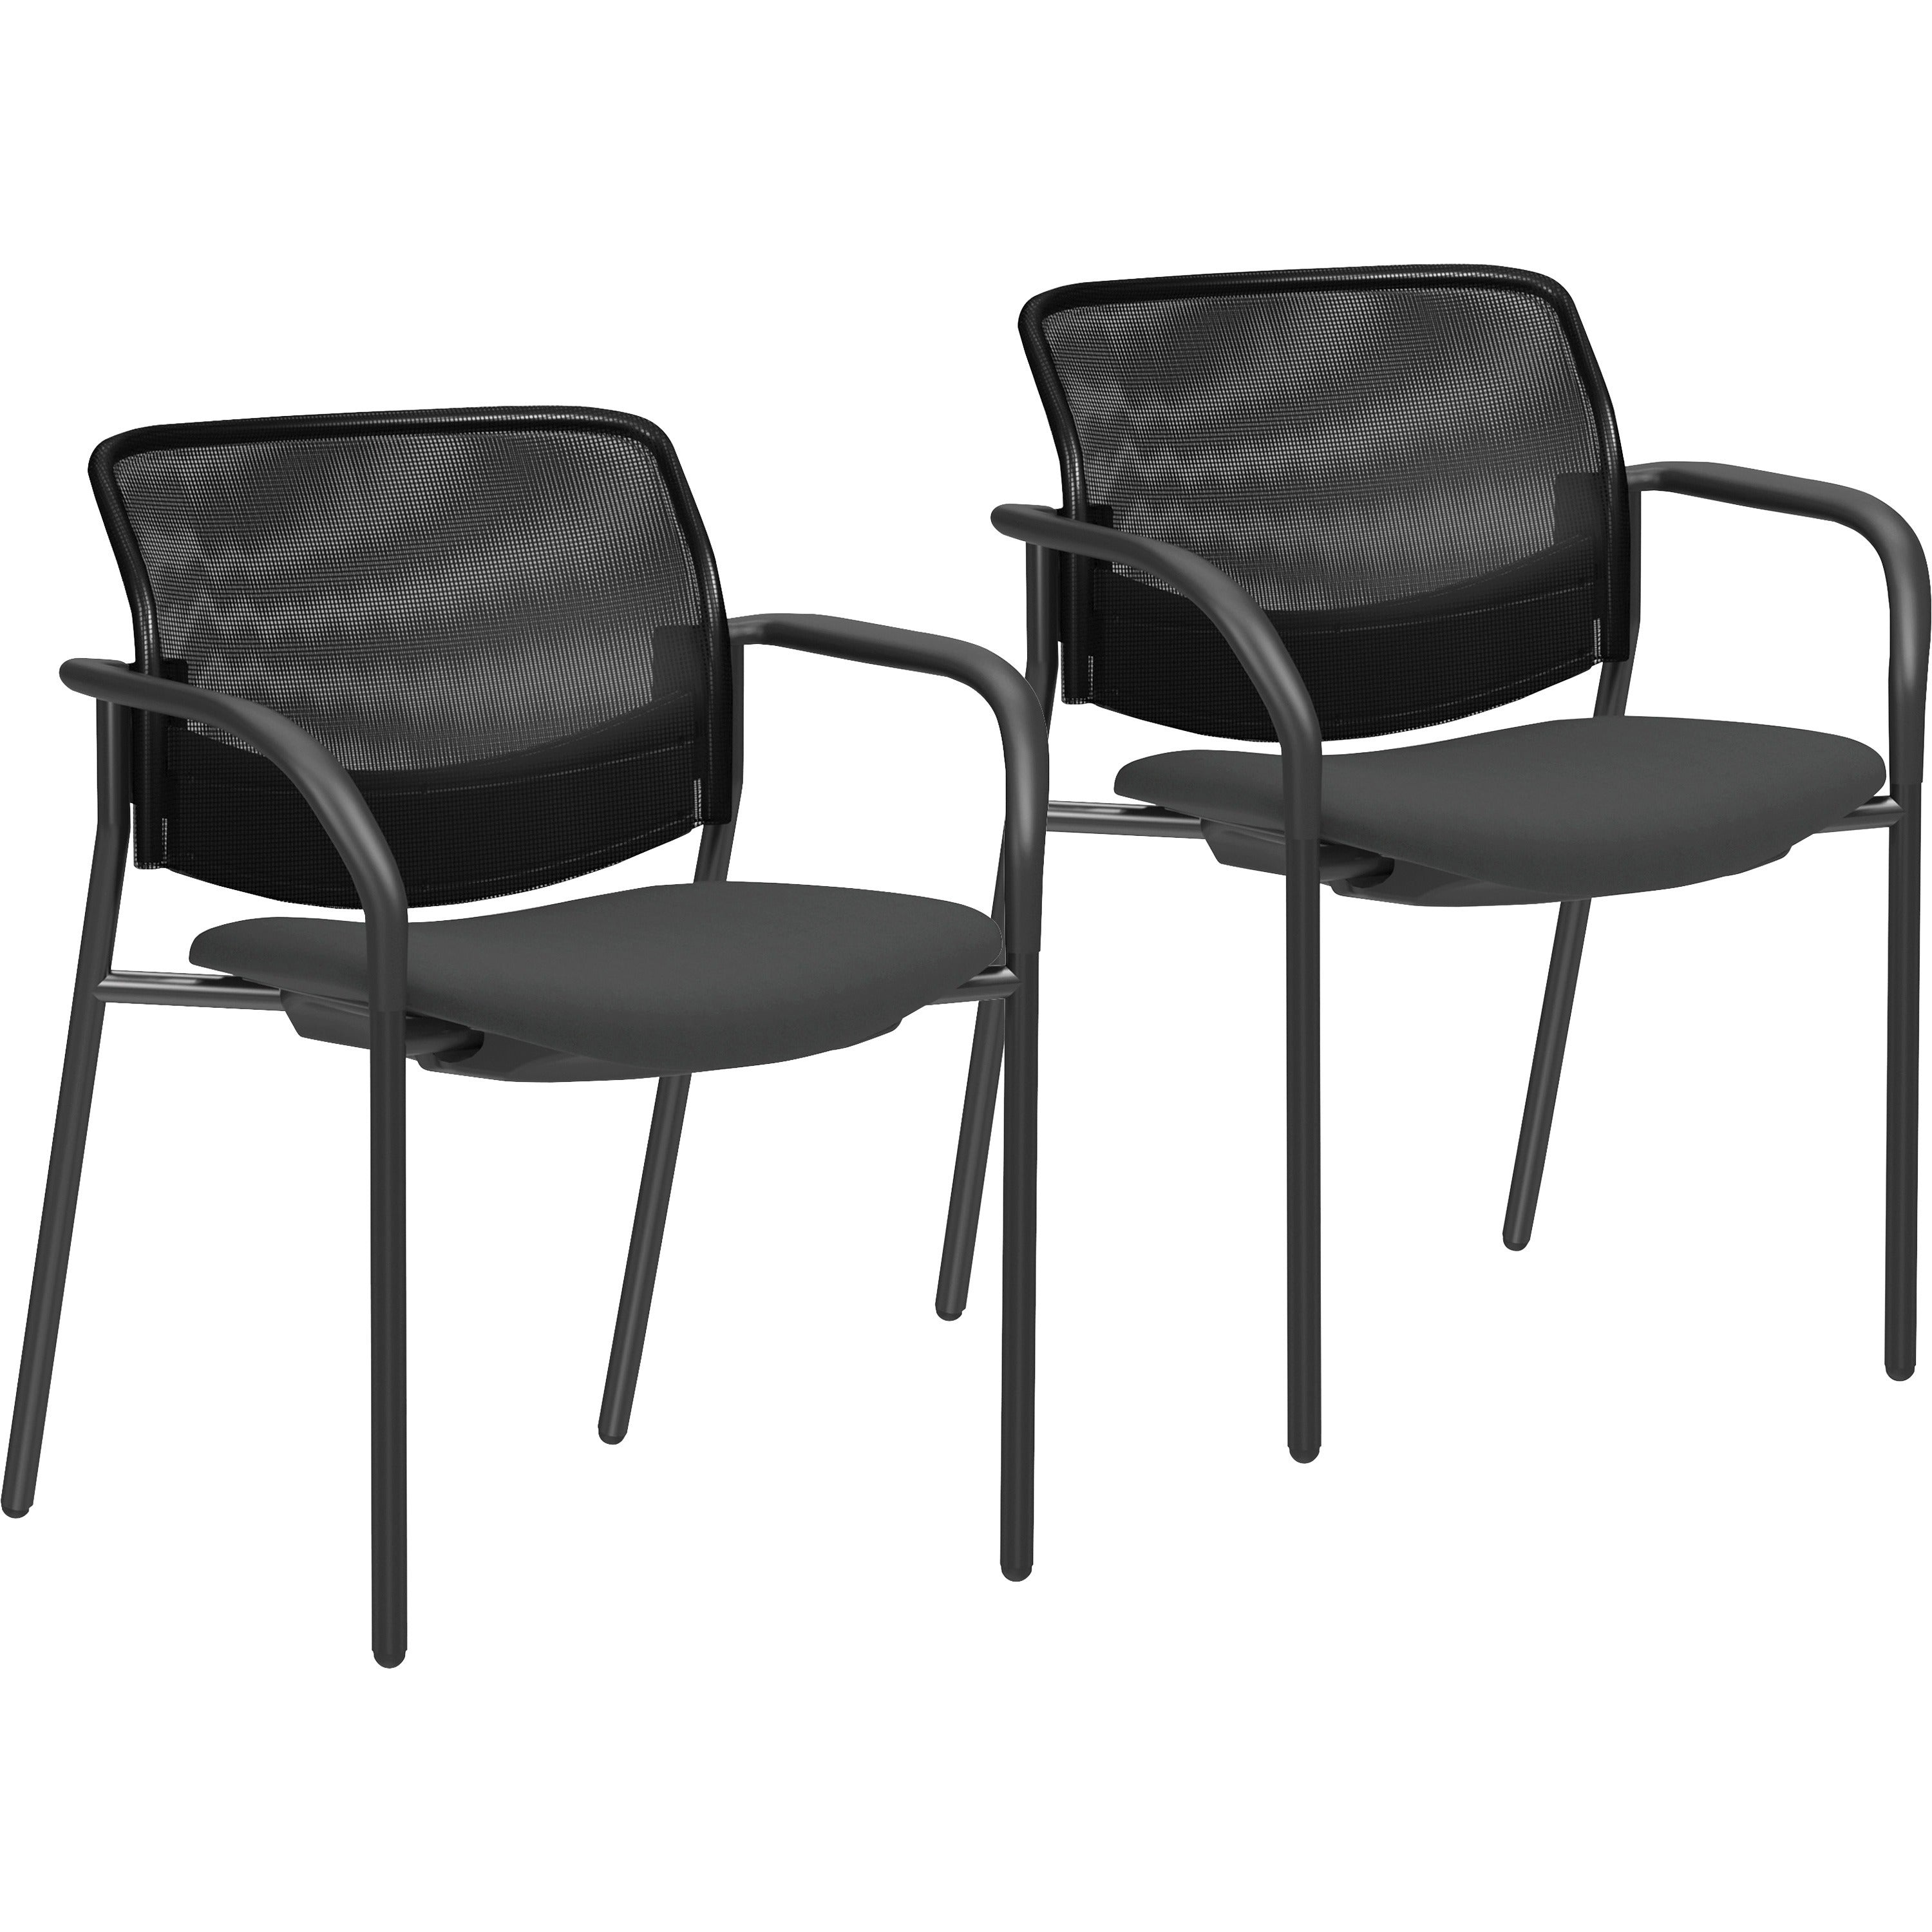 lorell-advent-mesh-back-guest-chairs-with-arms-tubular-steel-frame-mid-back-four-legged-base-black-2-carton_llr83112 - 1